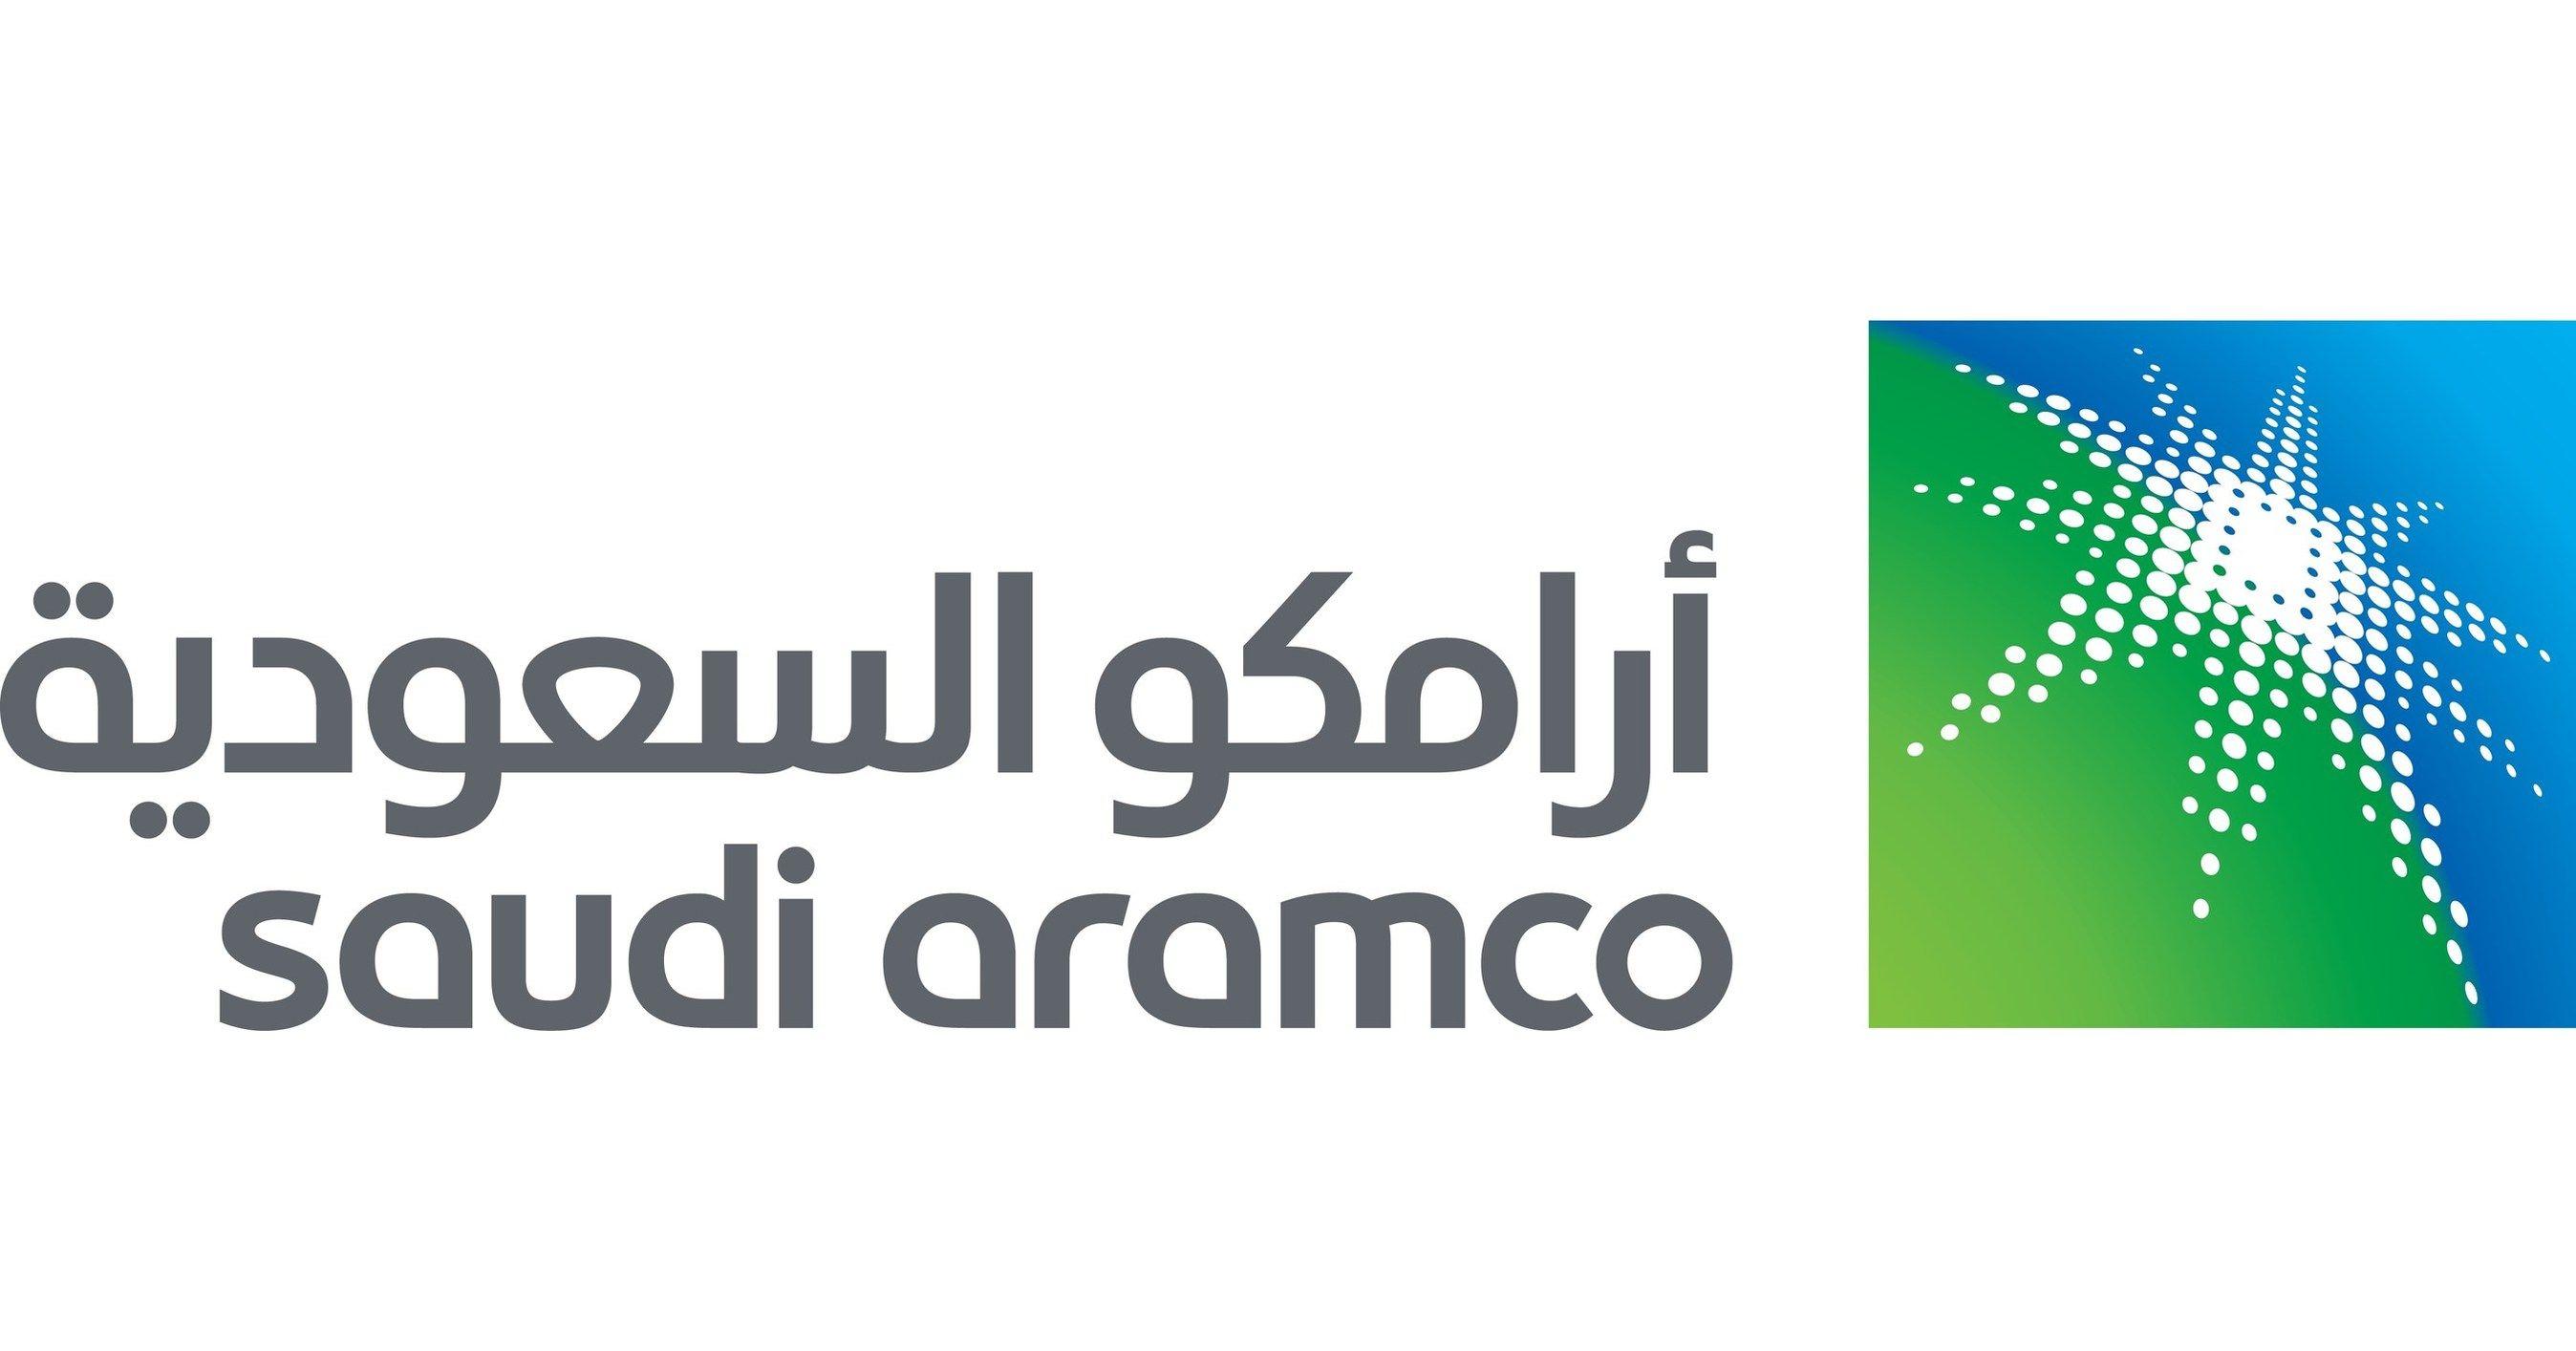 Aramco Logo - Saudi Aramco Recognized as a Leader in the Fourth Industrial Revolution